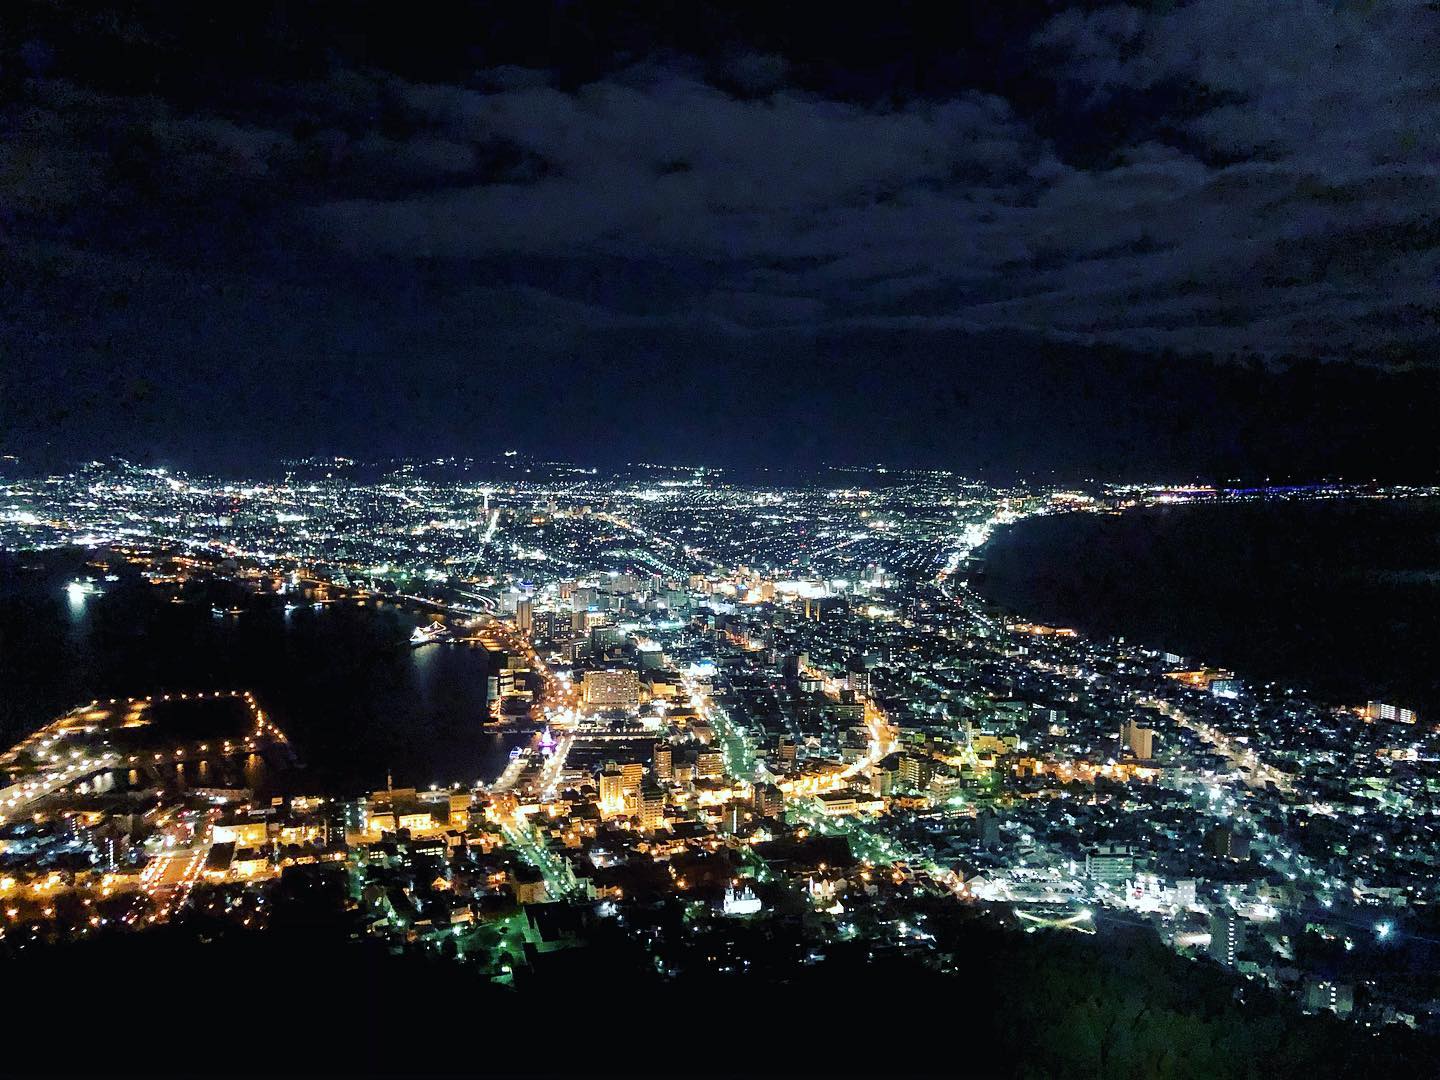 _⁣
Today’s from AOI Global is the beautiful nightscape from Mt.Hakodate in Hokkaido prefecture. ⁣

The stunning night view displays scattered lights from the historic port city of Hakodate. The city is sandwiched between two vast bodies of water which is how the view gets its unique curve. 
The view was deemed worthy of three stars (the highest possible rating) in the Michelin Green Guide and has been anointed as one of Japan’s most impressive vantage points.

#aoiglobal  #filmmakersworld  #shootinglocation  #filmmakinglife  t #weeklyinspiration  #remoteshooting⁣
#japanesemonkey 